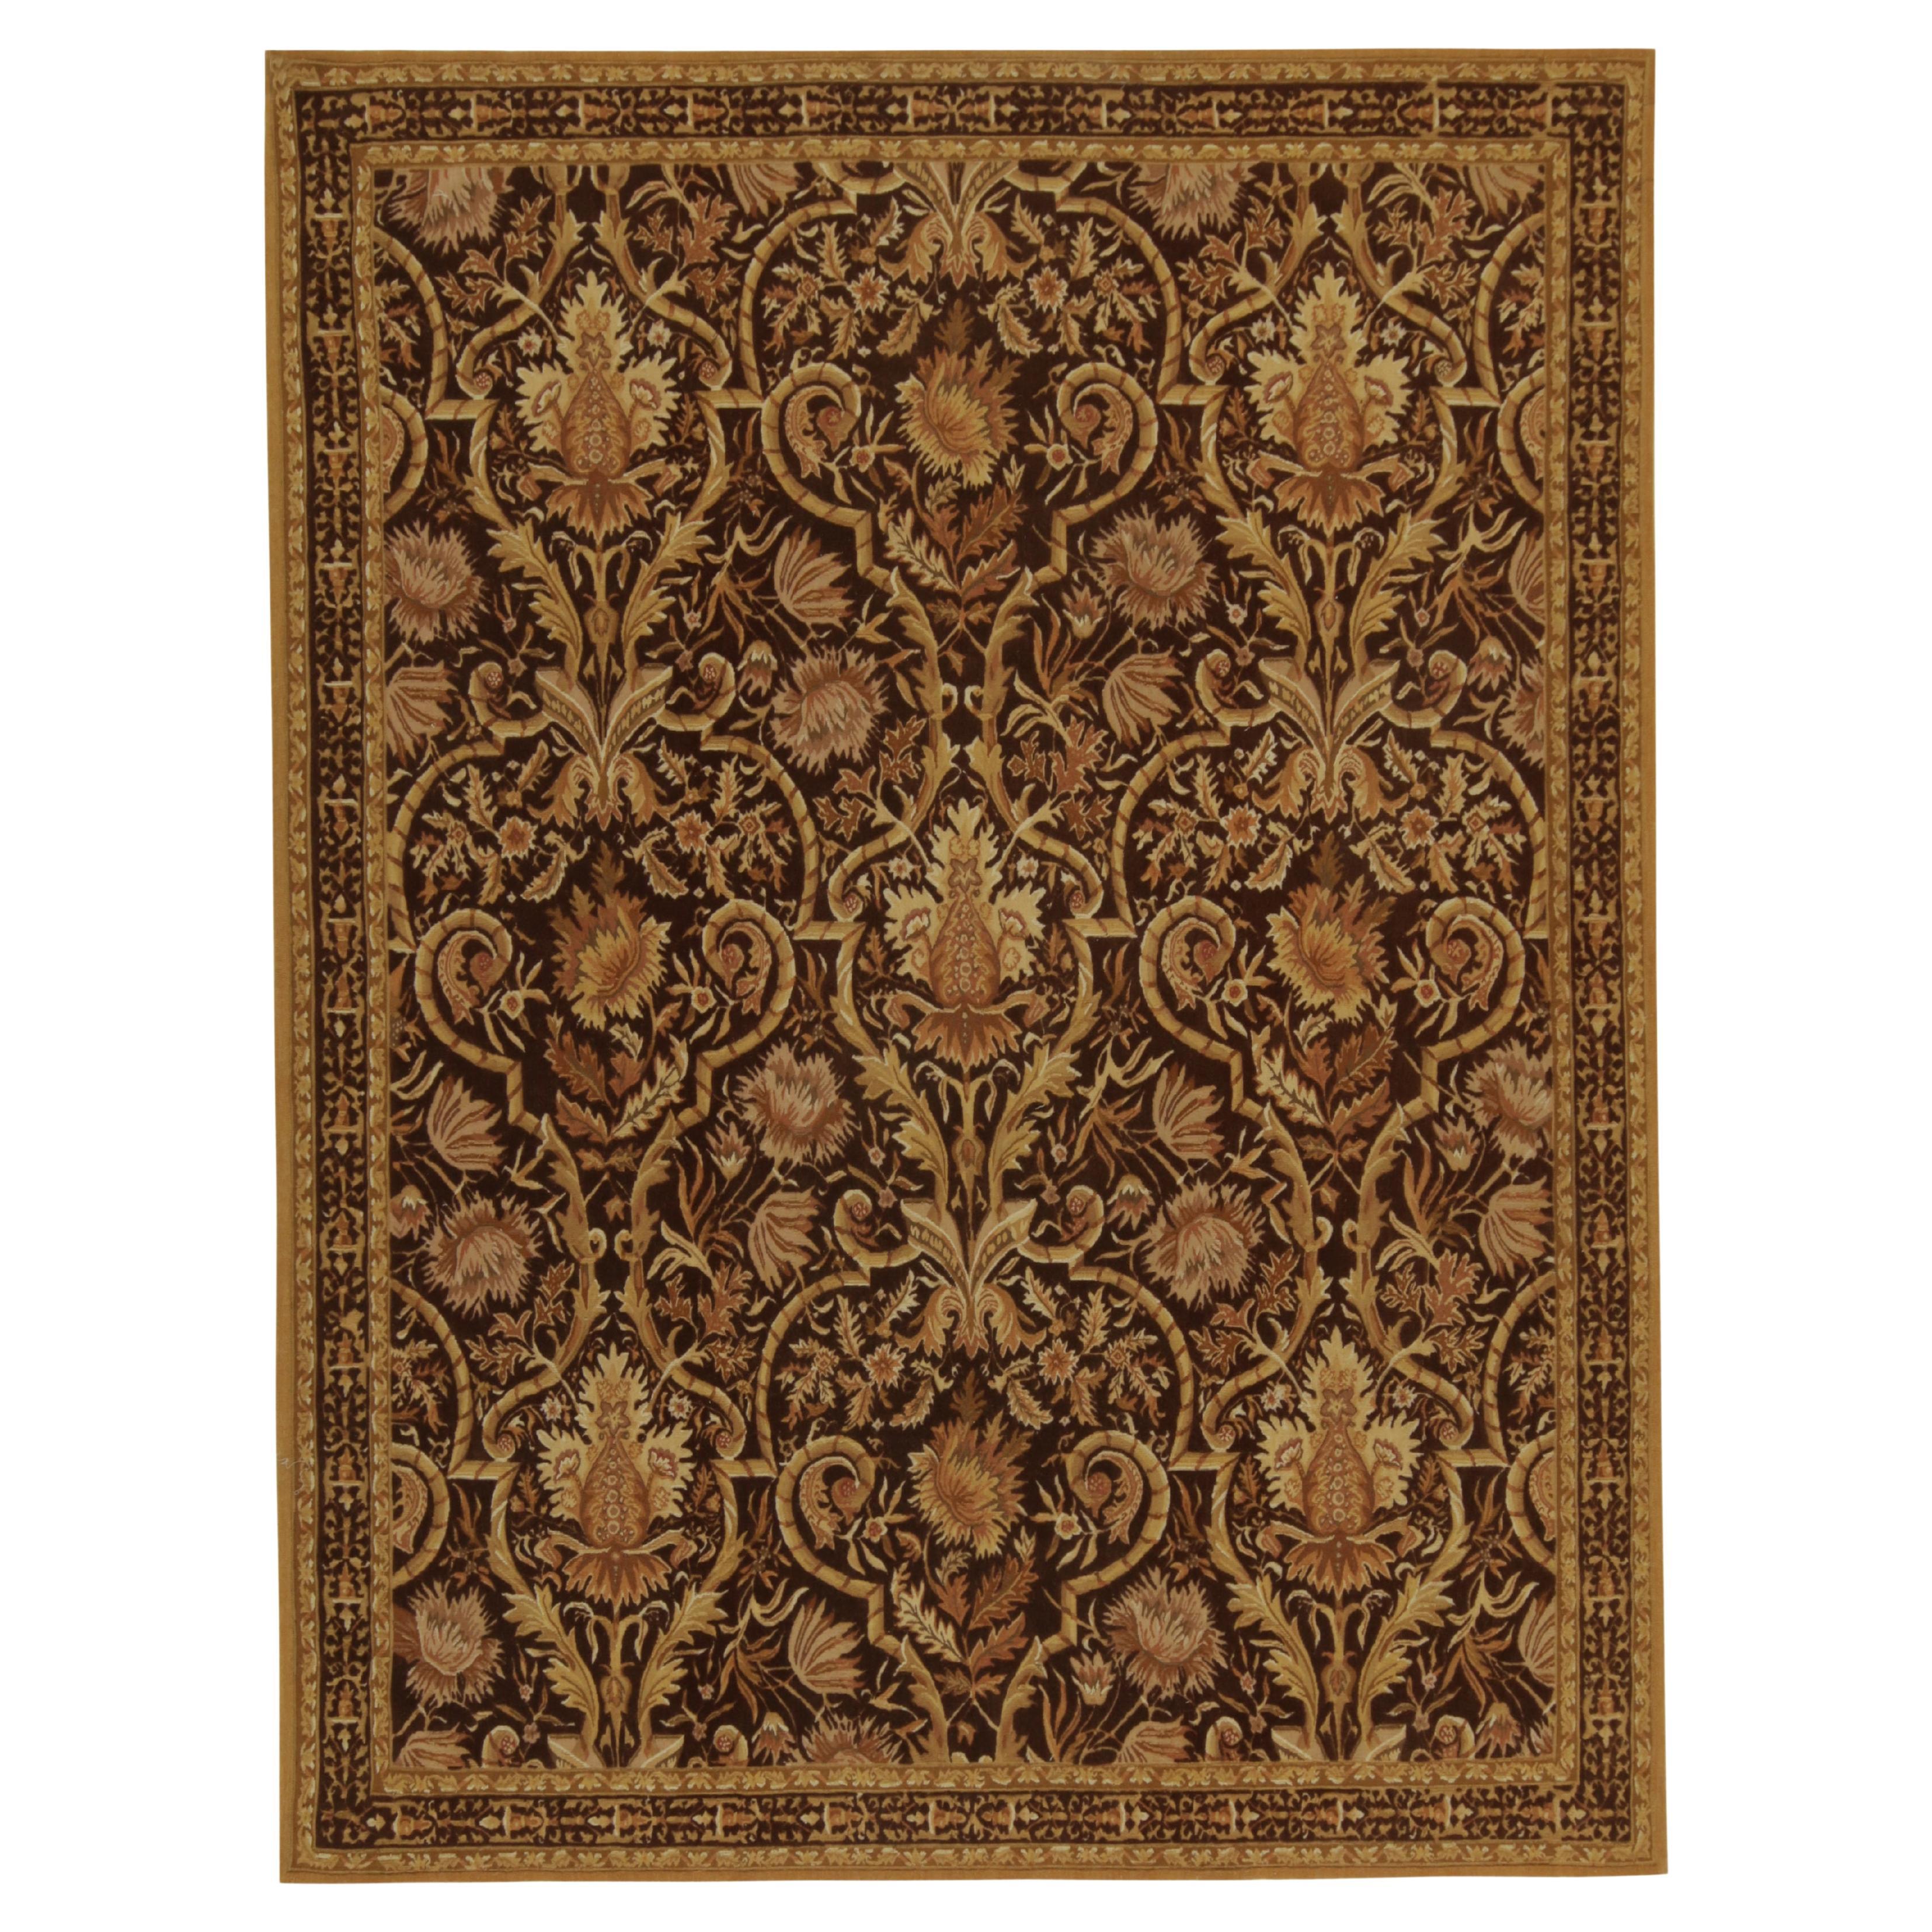 Rug & Kilim’s European Tudor style Kilim in Brown with Gold Floral Pattern